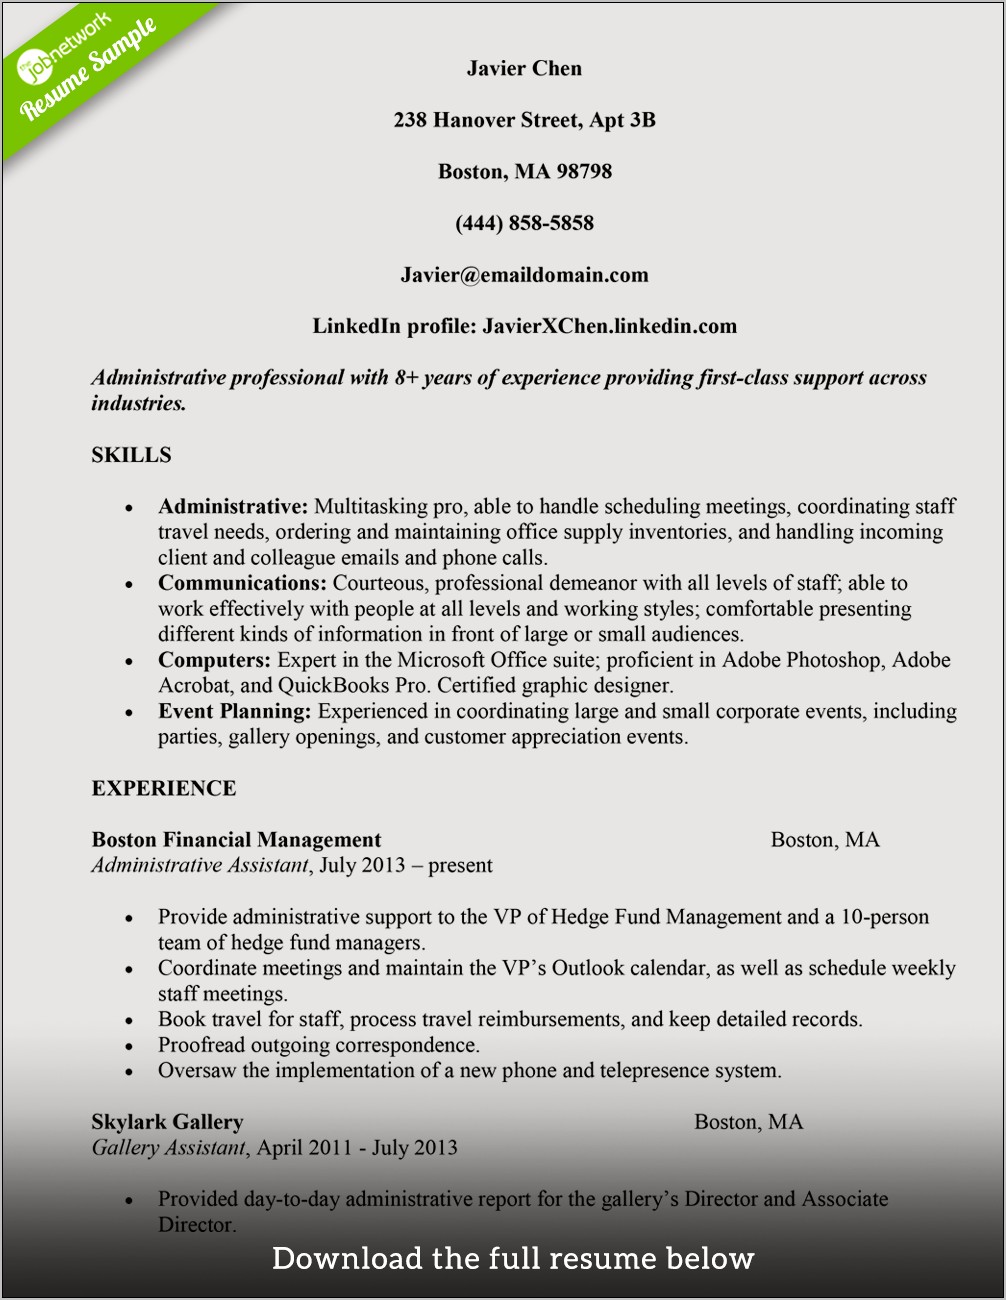 Sample Of Administrative Assistant Resume Objective